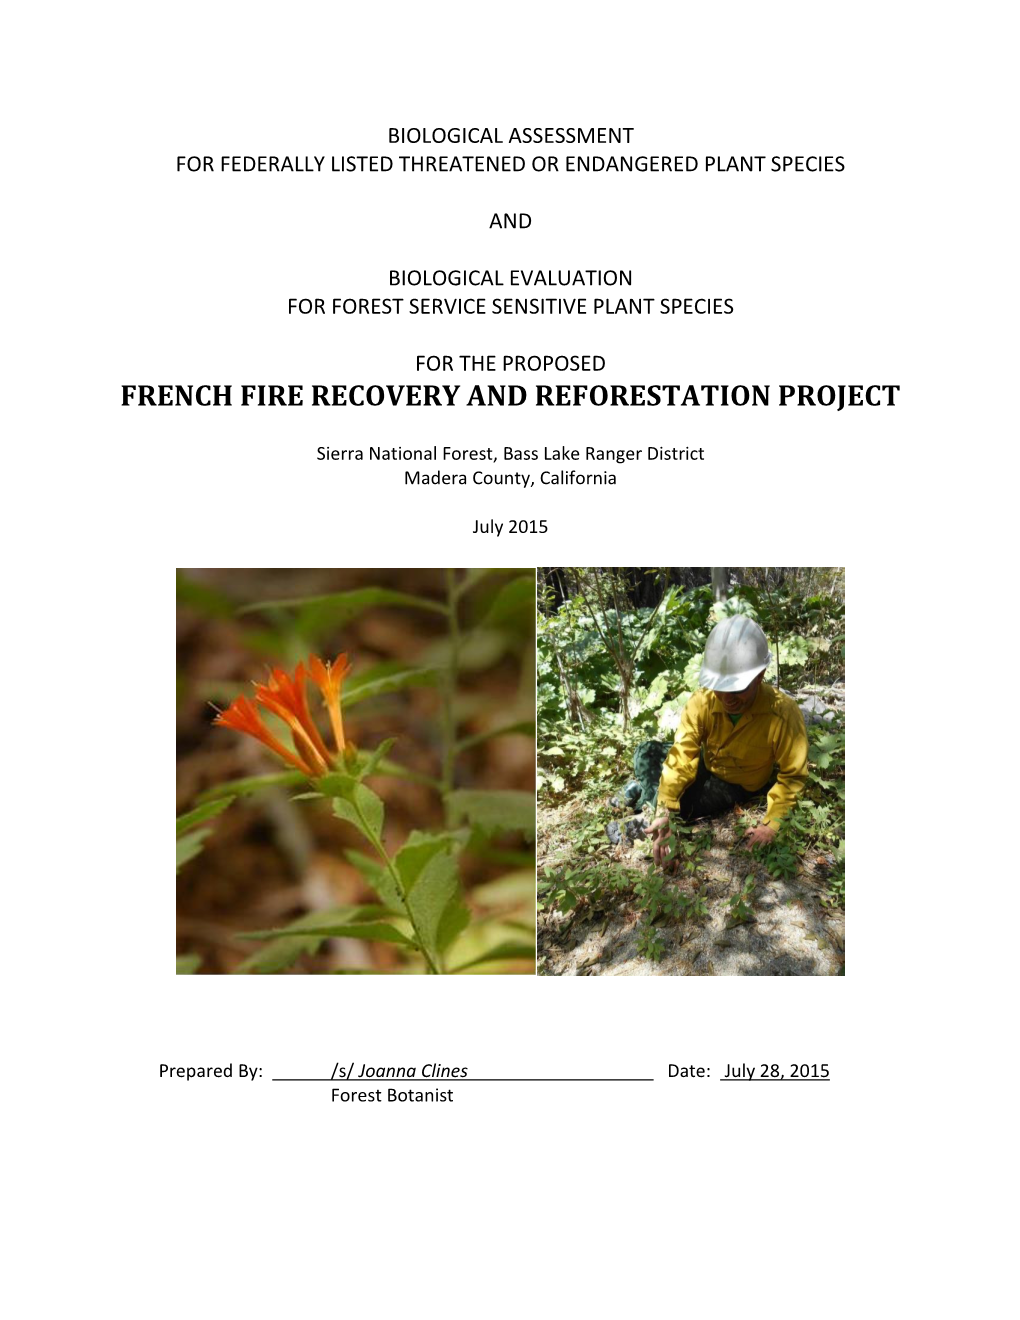 French Fire Recovery and Reforestation Project